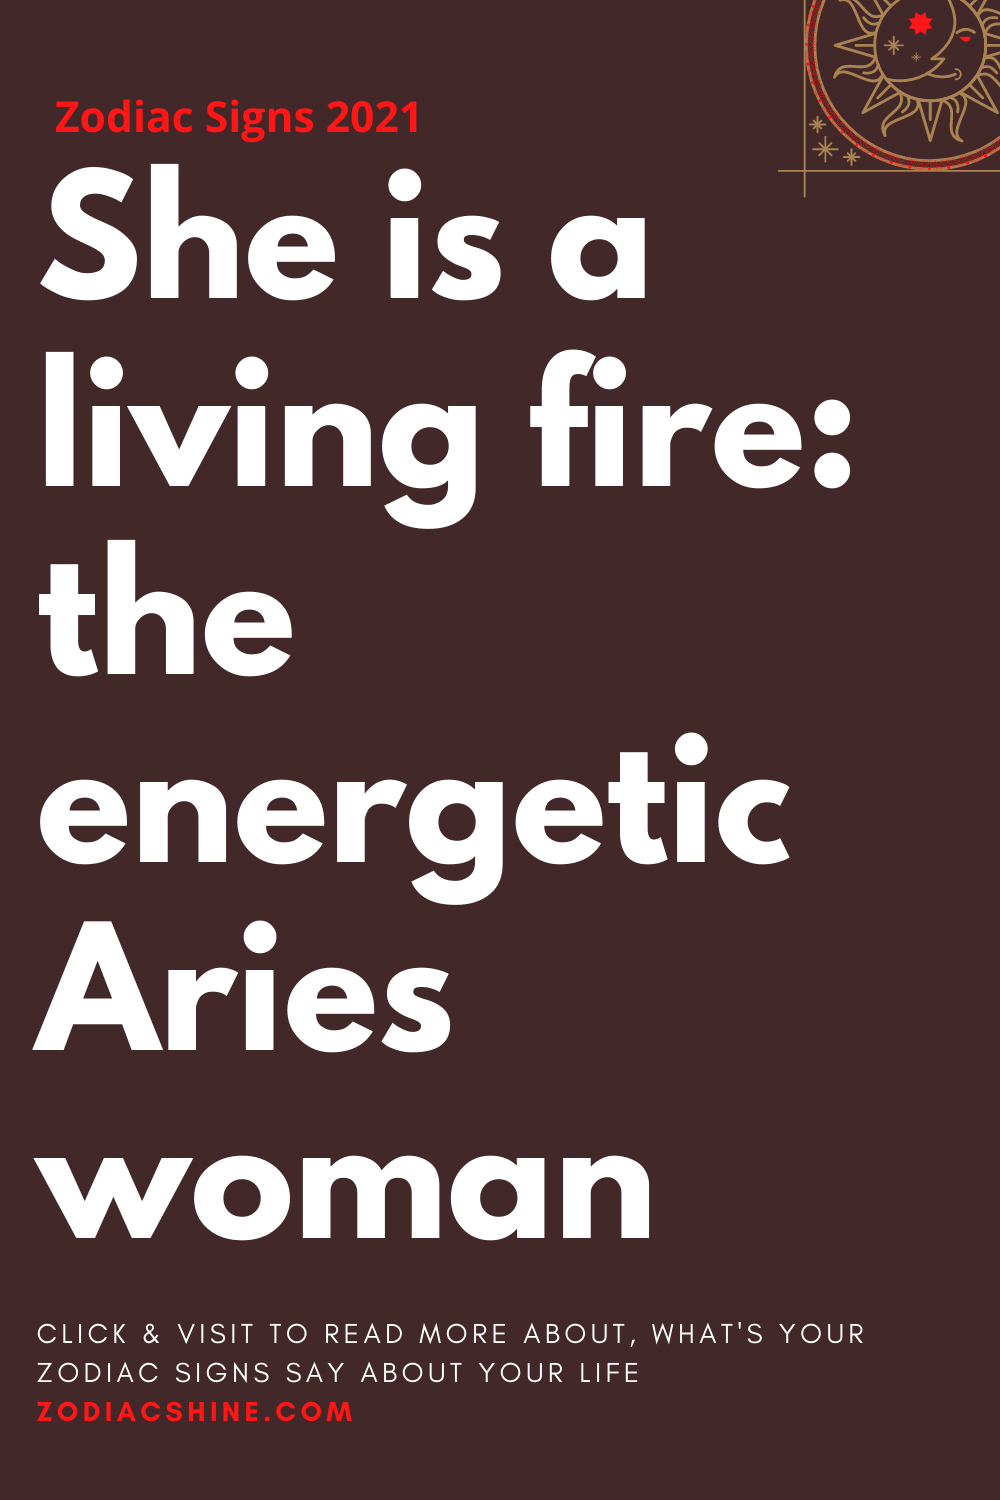 She is a living fire: the energetic Aries woman